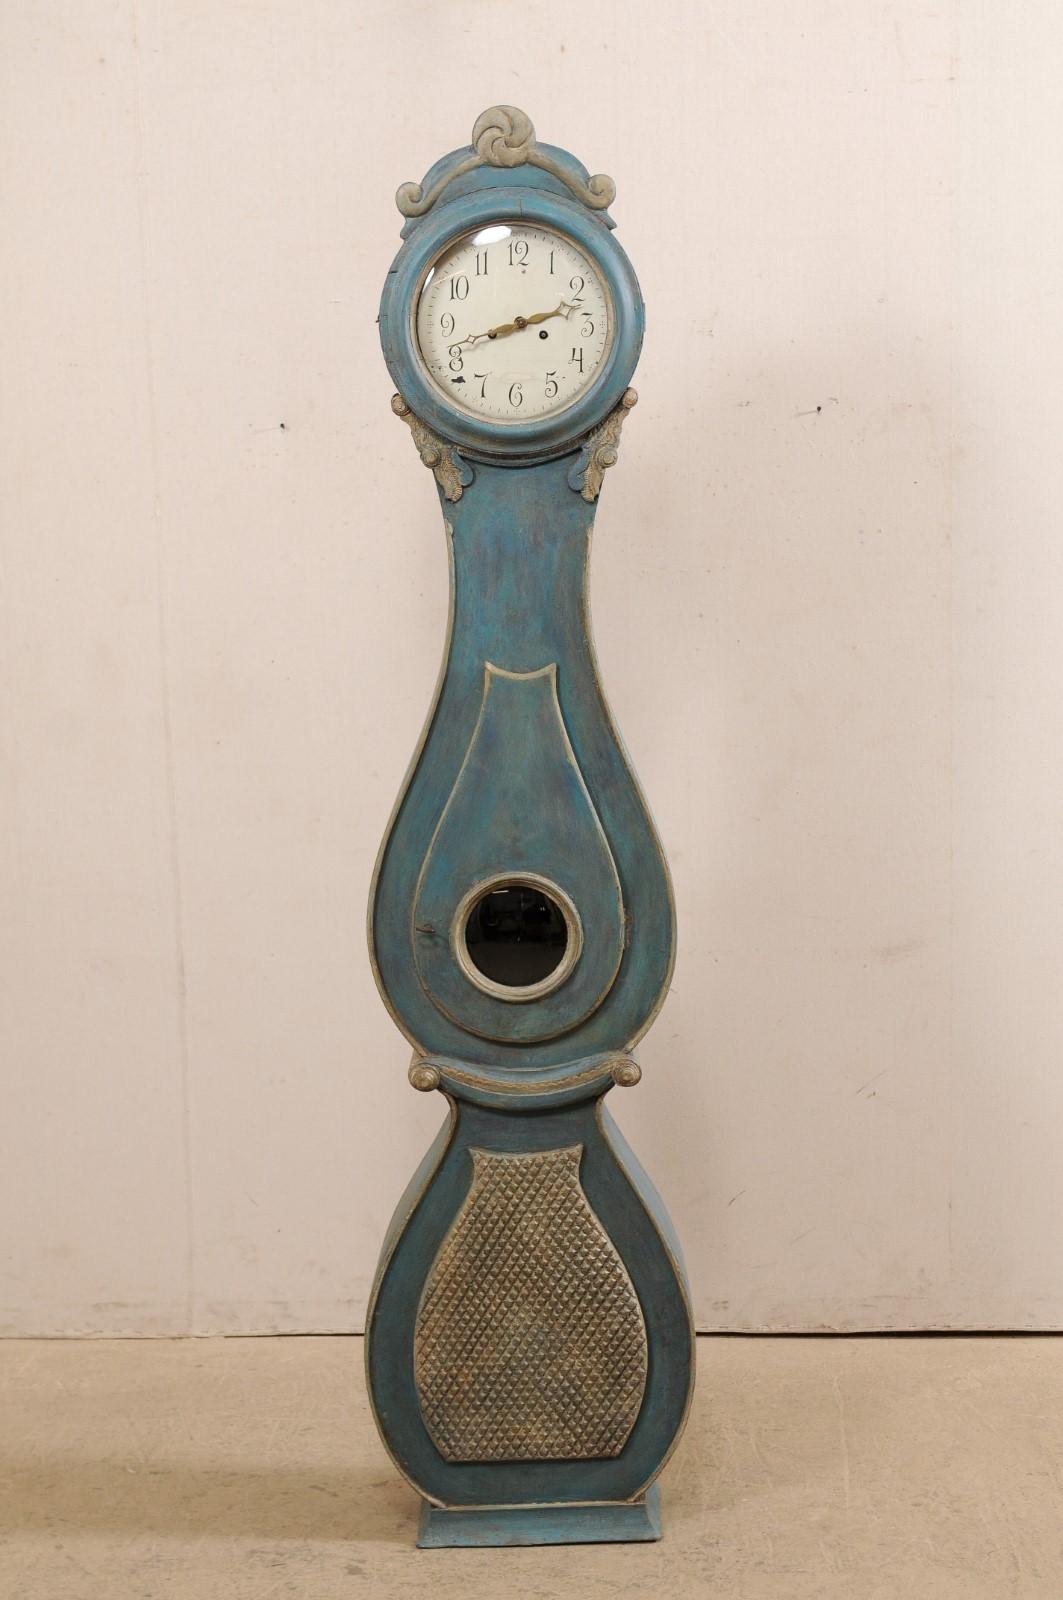 A Swedish Fryksdahl painted and carved wood floor clock from the late 18th to early 19th century. This antique Fryksdahl clock from Sweden is full of decorative accents throughout which enhance and accentuate this shapely clock. The crest or crown